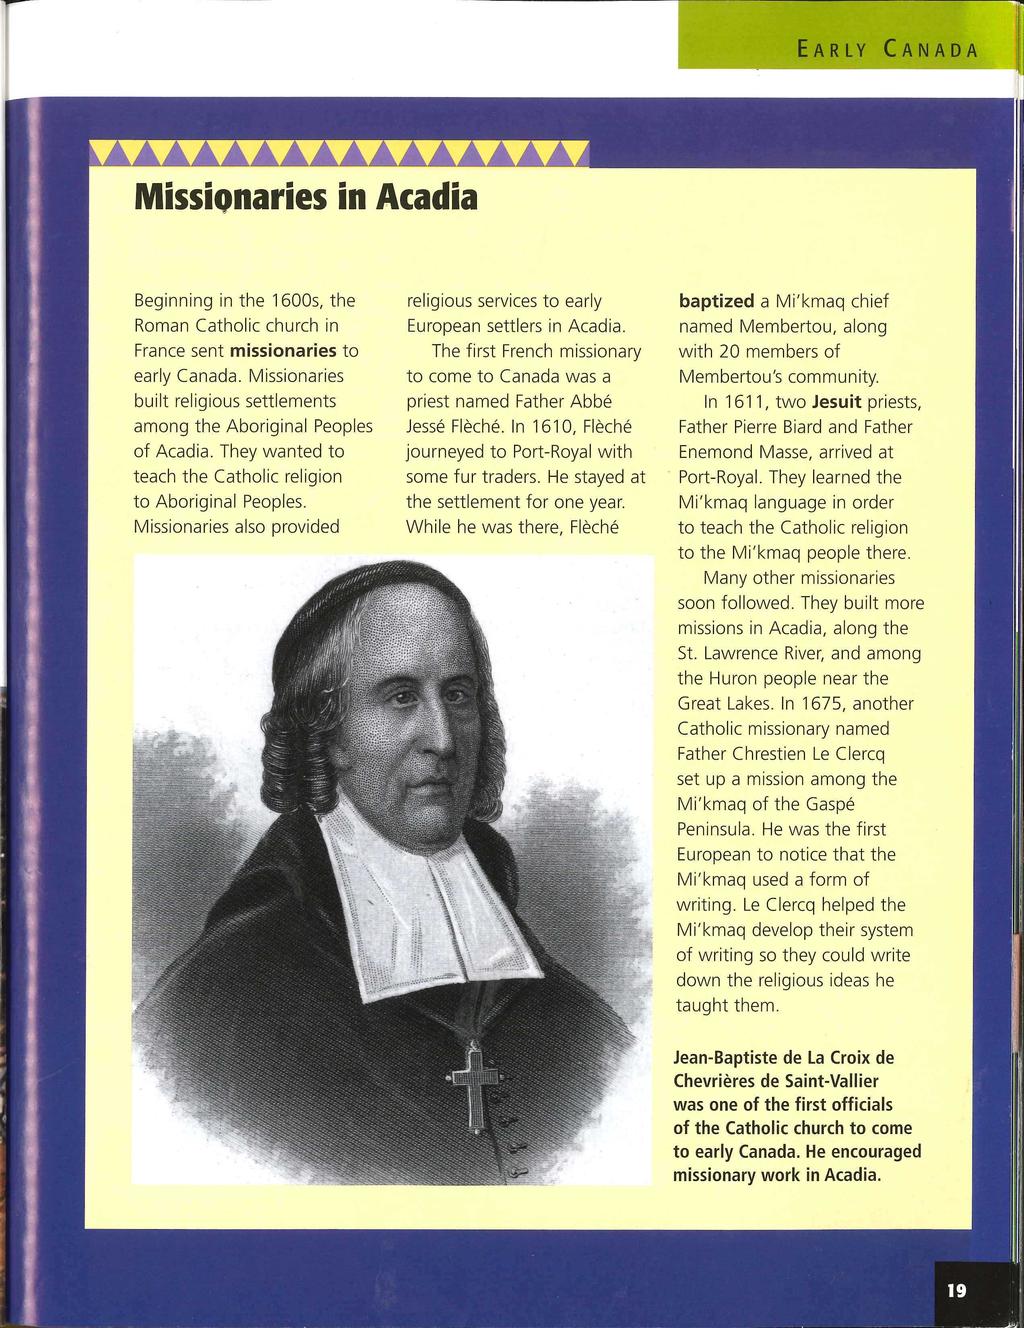 Missionaries in Acadia Beginning in the 1600s, the Roman Catholic church in France sent missionaries to early Canada. Missionaries built religious settlements among the Aboriginal Peoples of Acadia.